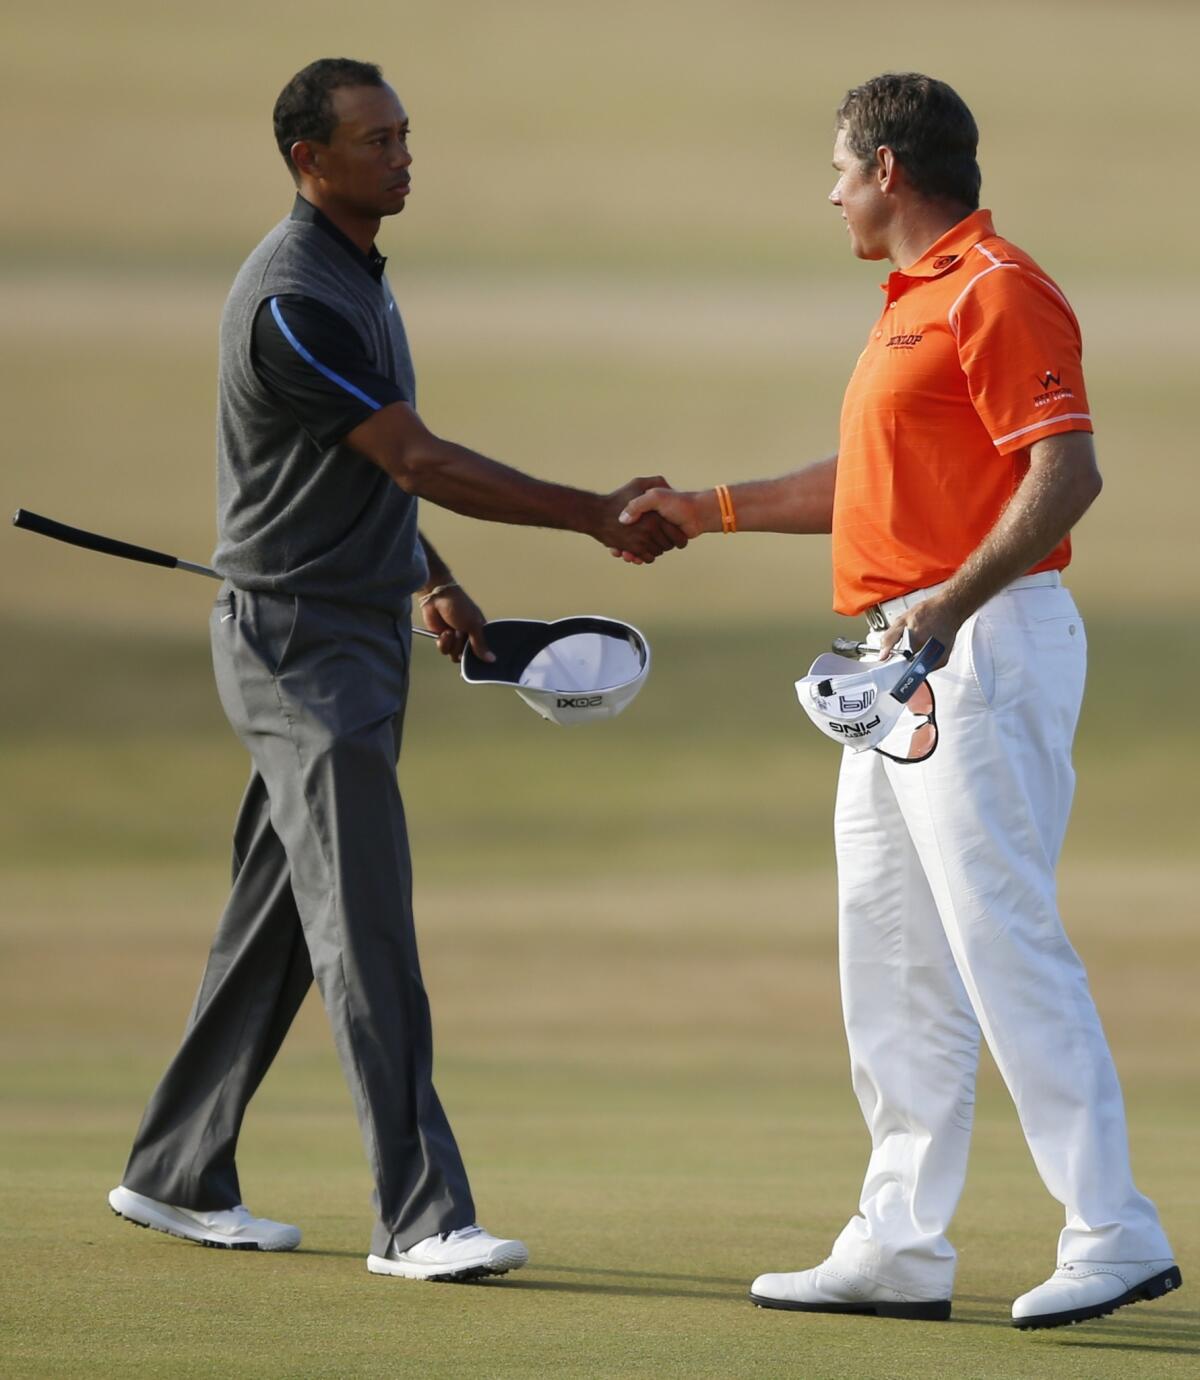 Tiger Woods, left, shakes hands with Lee Westwood following the completion of the third round of the British Open on Saturday.